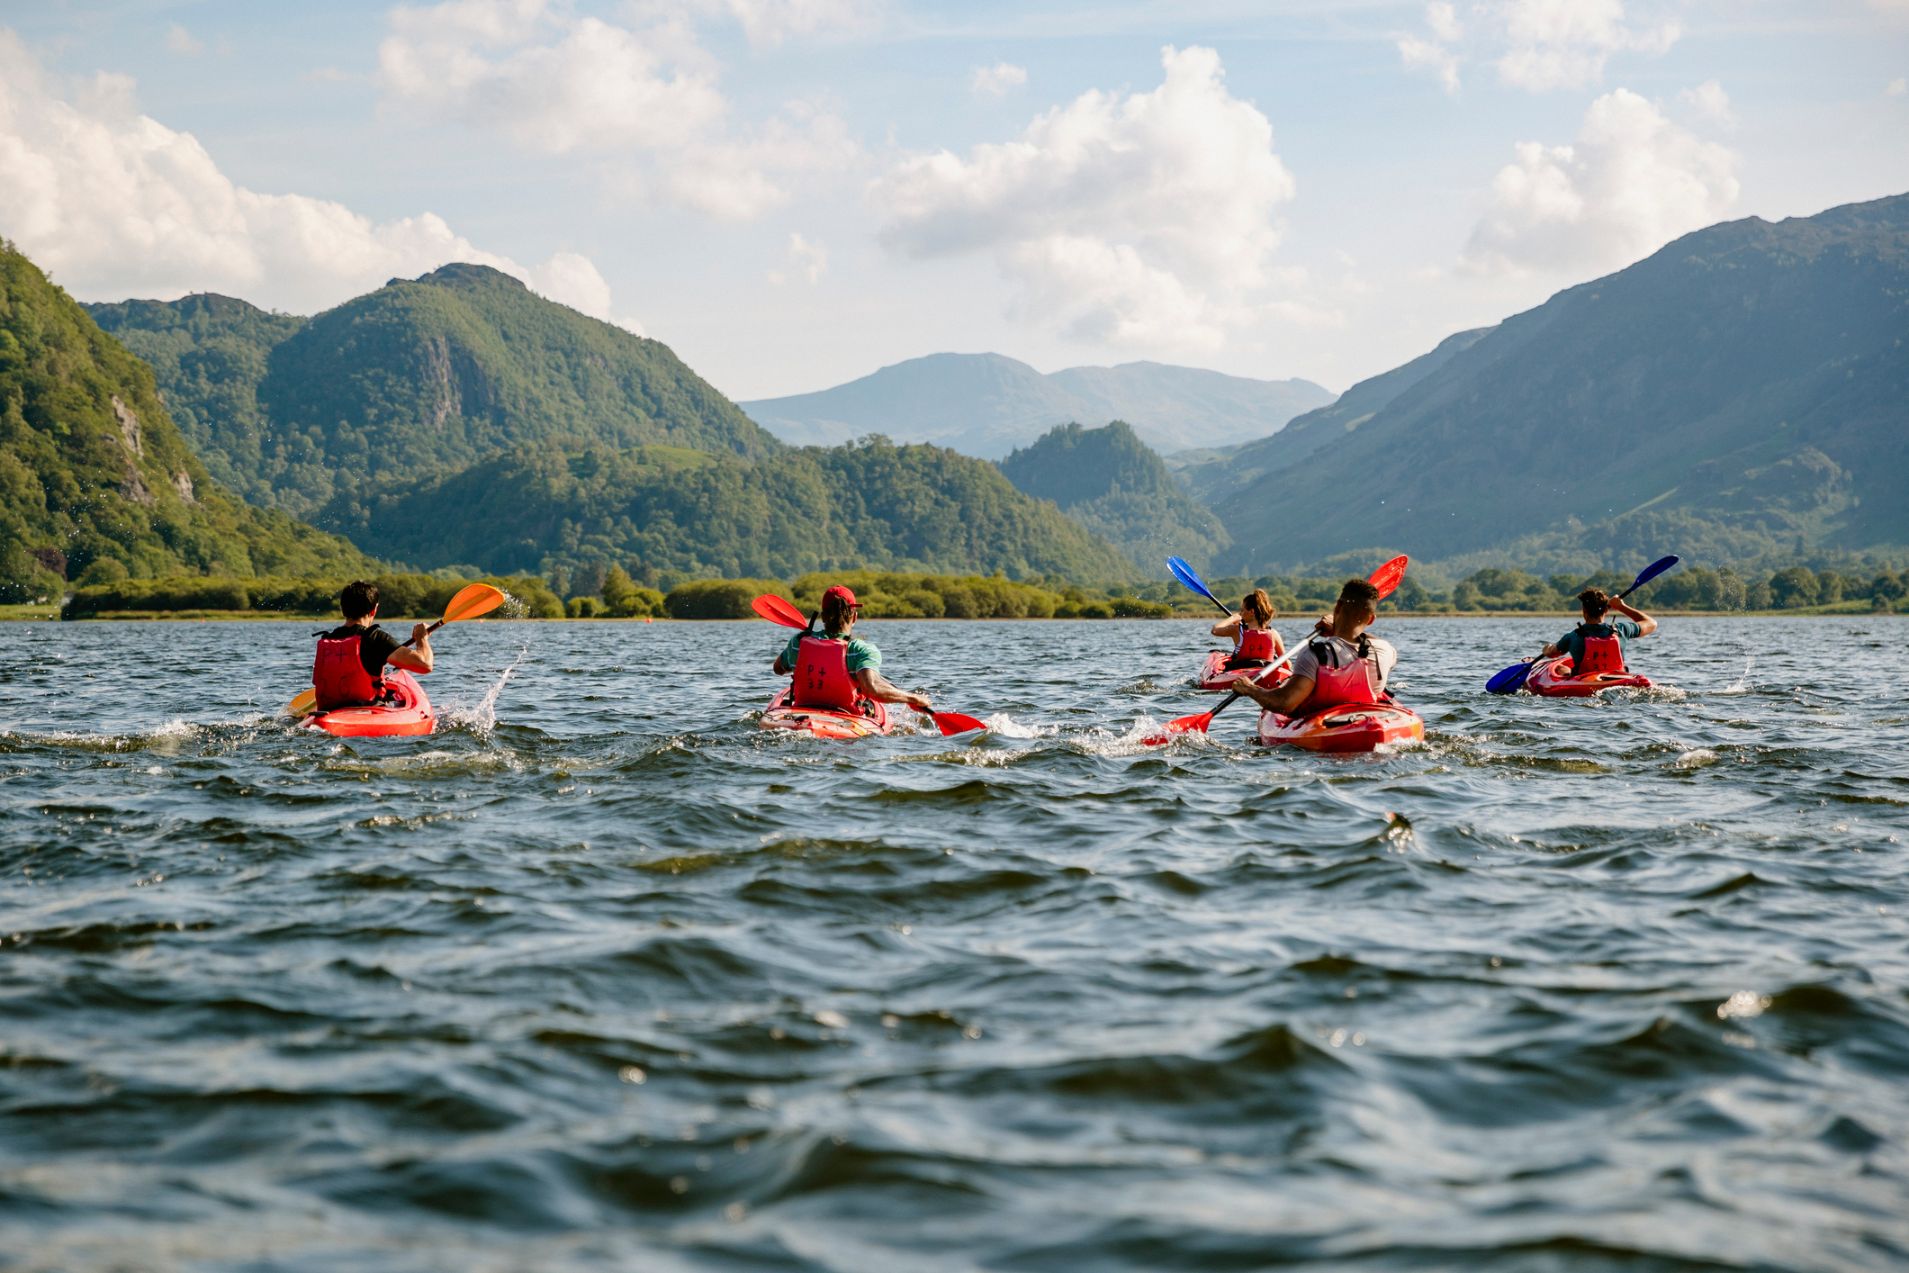 Five kayakers head out to paddle in a scenic location, surrounded by mountains.